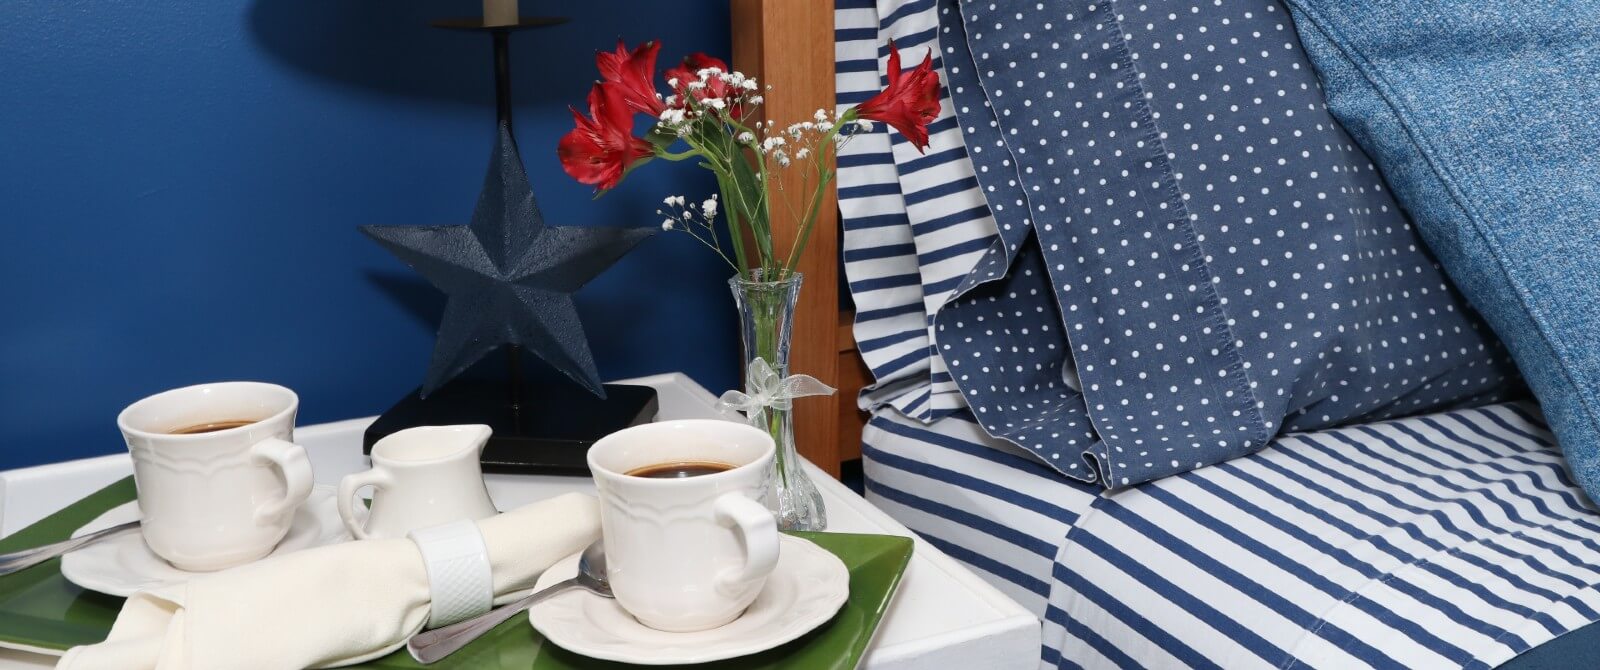 Bed with striped sheets and blue pillows with side table holding tray of coffee mugs and flowers